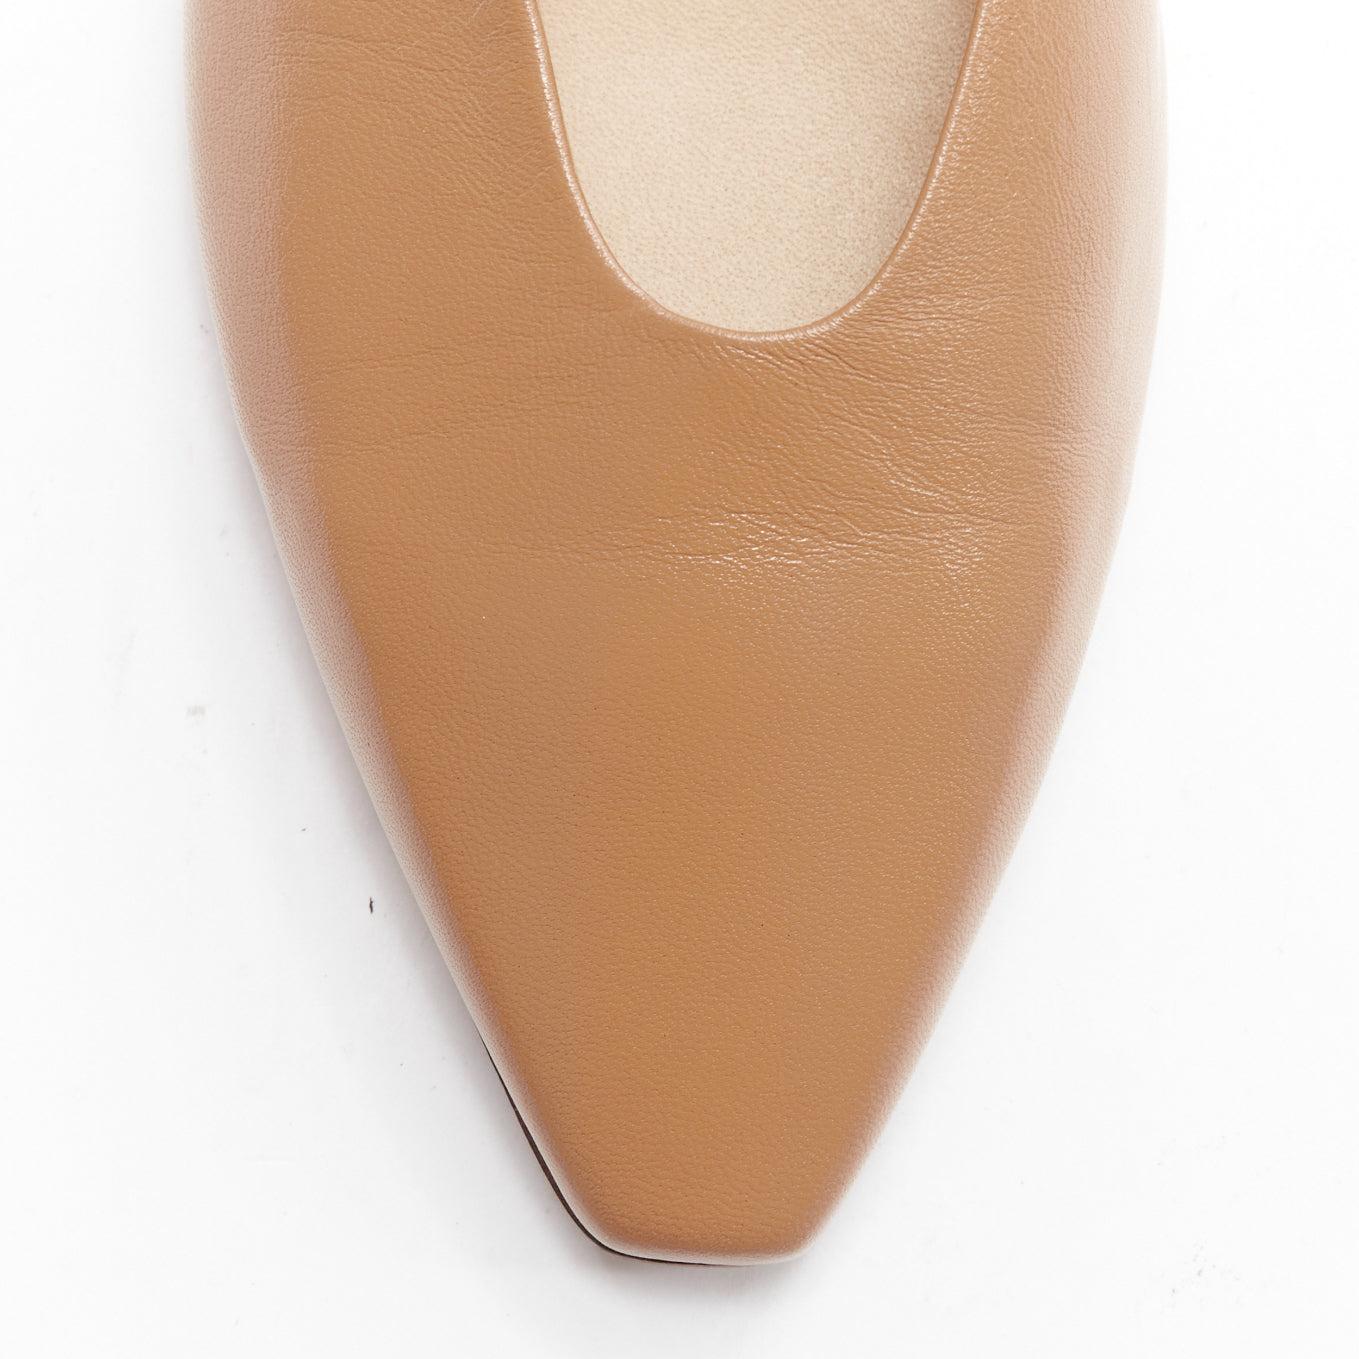 new AEYDE nude smooth leather square toe ballet flats EU37 2